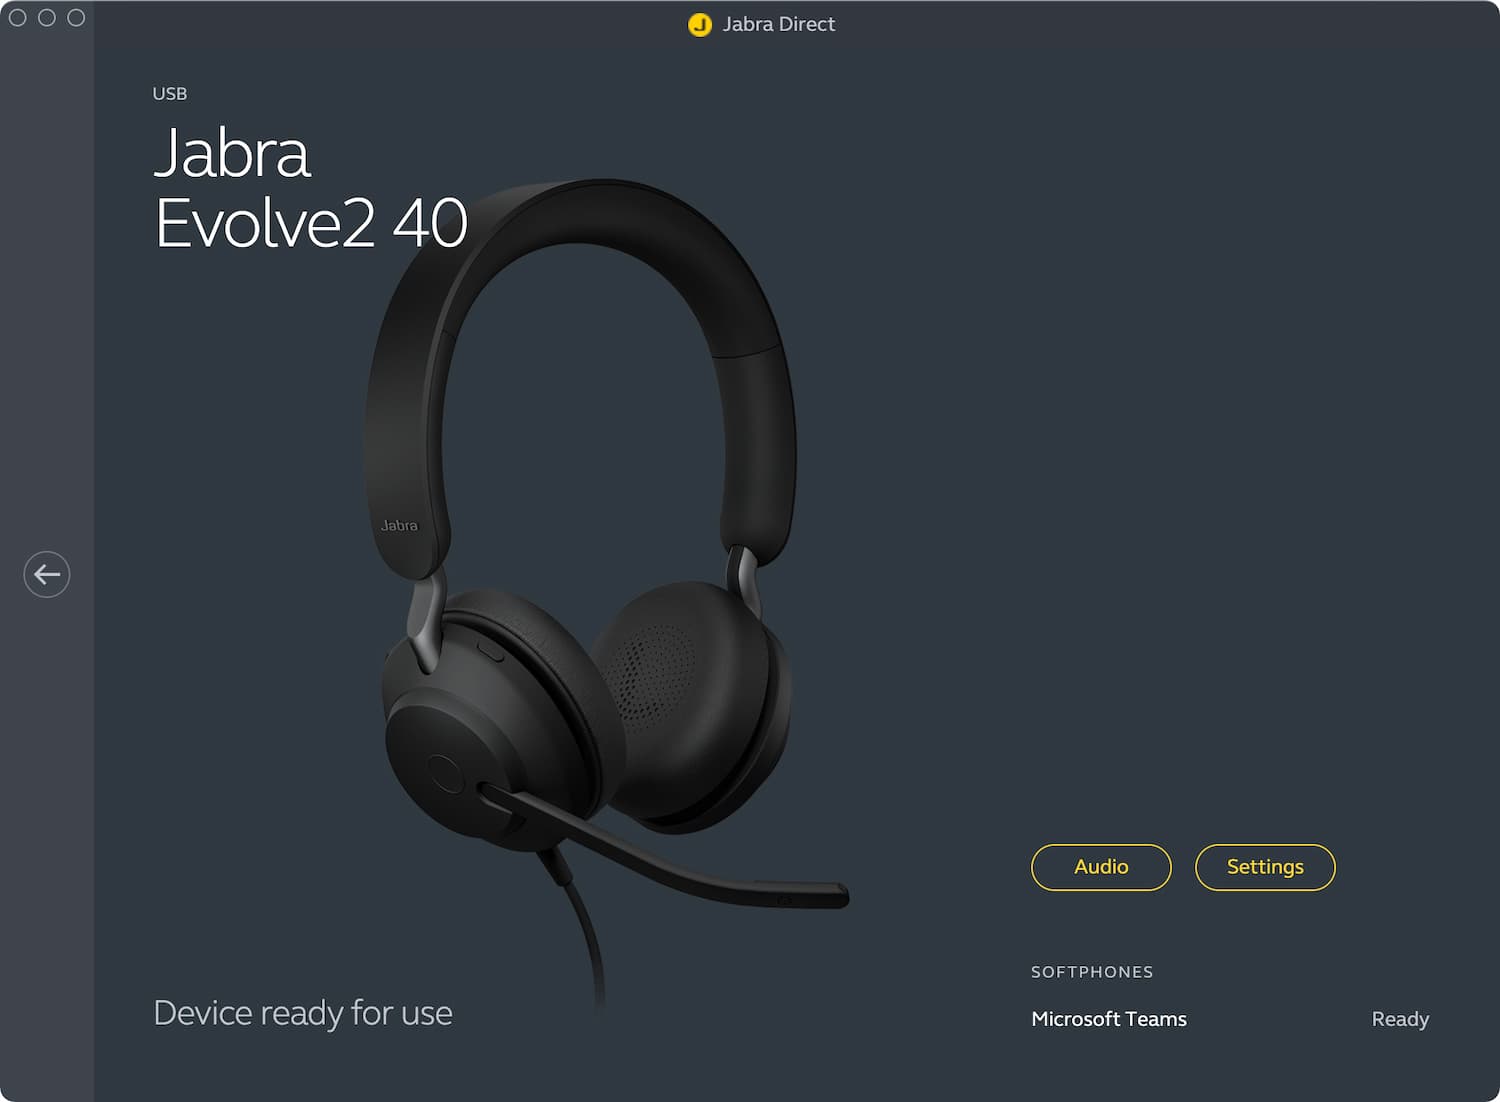 Jabra Direct (Device ready for use)